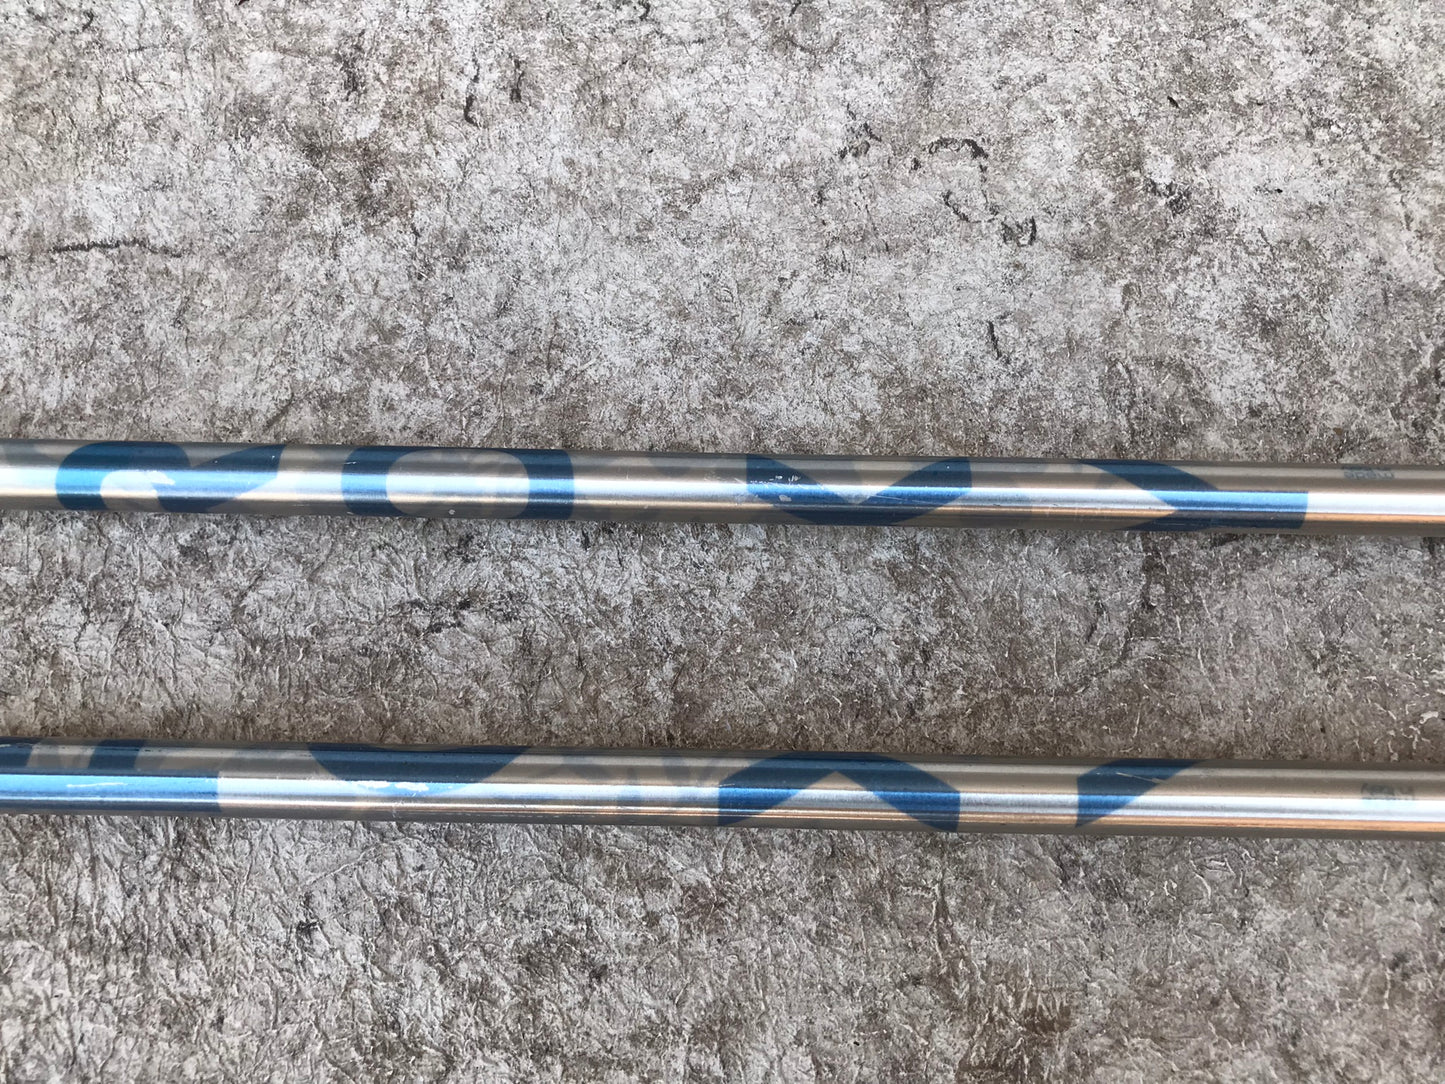 Ski Poles Adult Size 48 inch 120 cm Roxy Glitter Silver Blue Chrome Excellent Like New